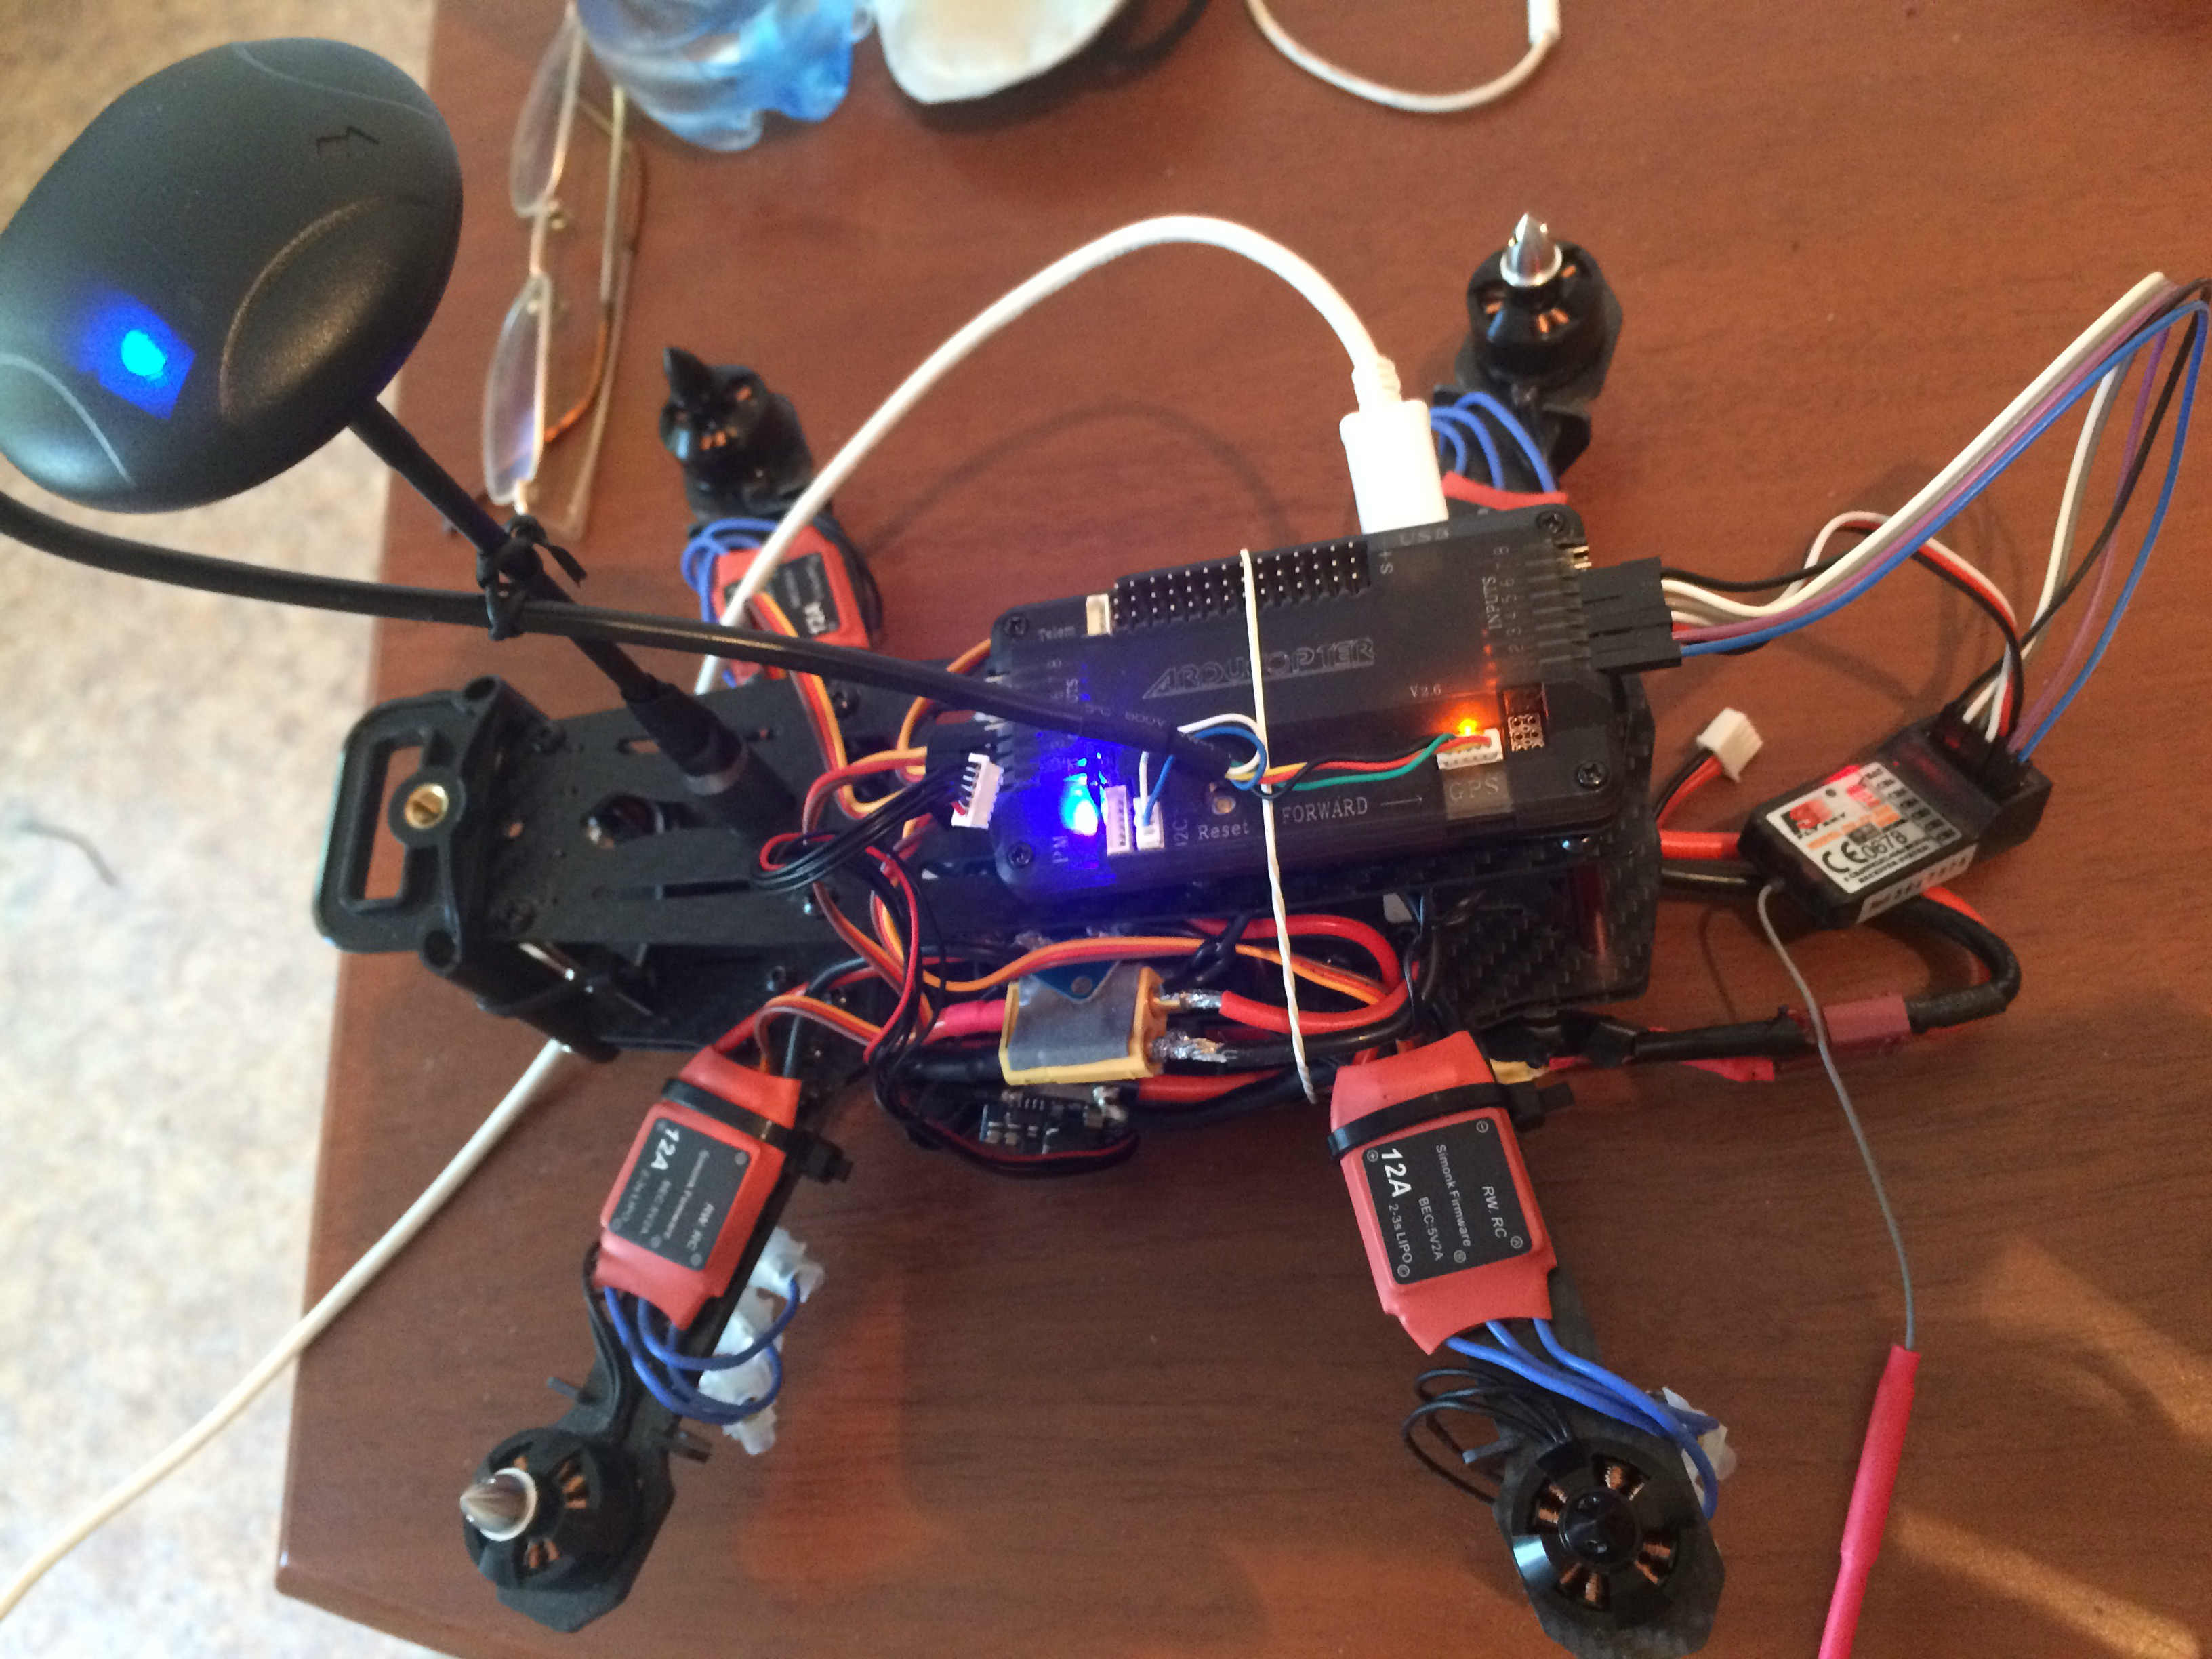 No connection between receiver and motors  in quadcopter 